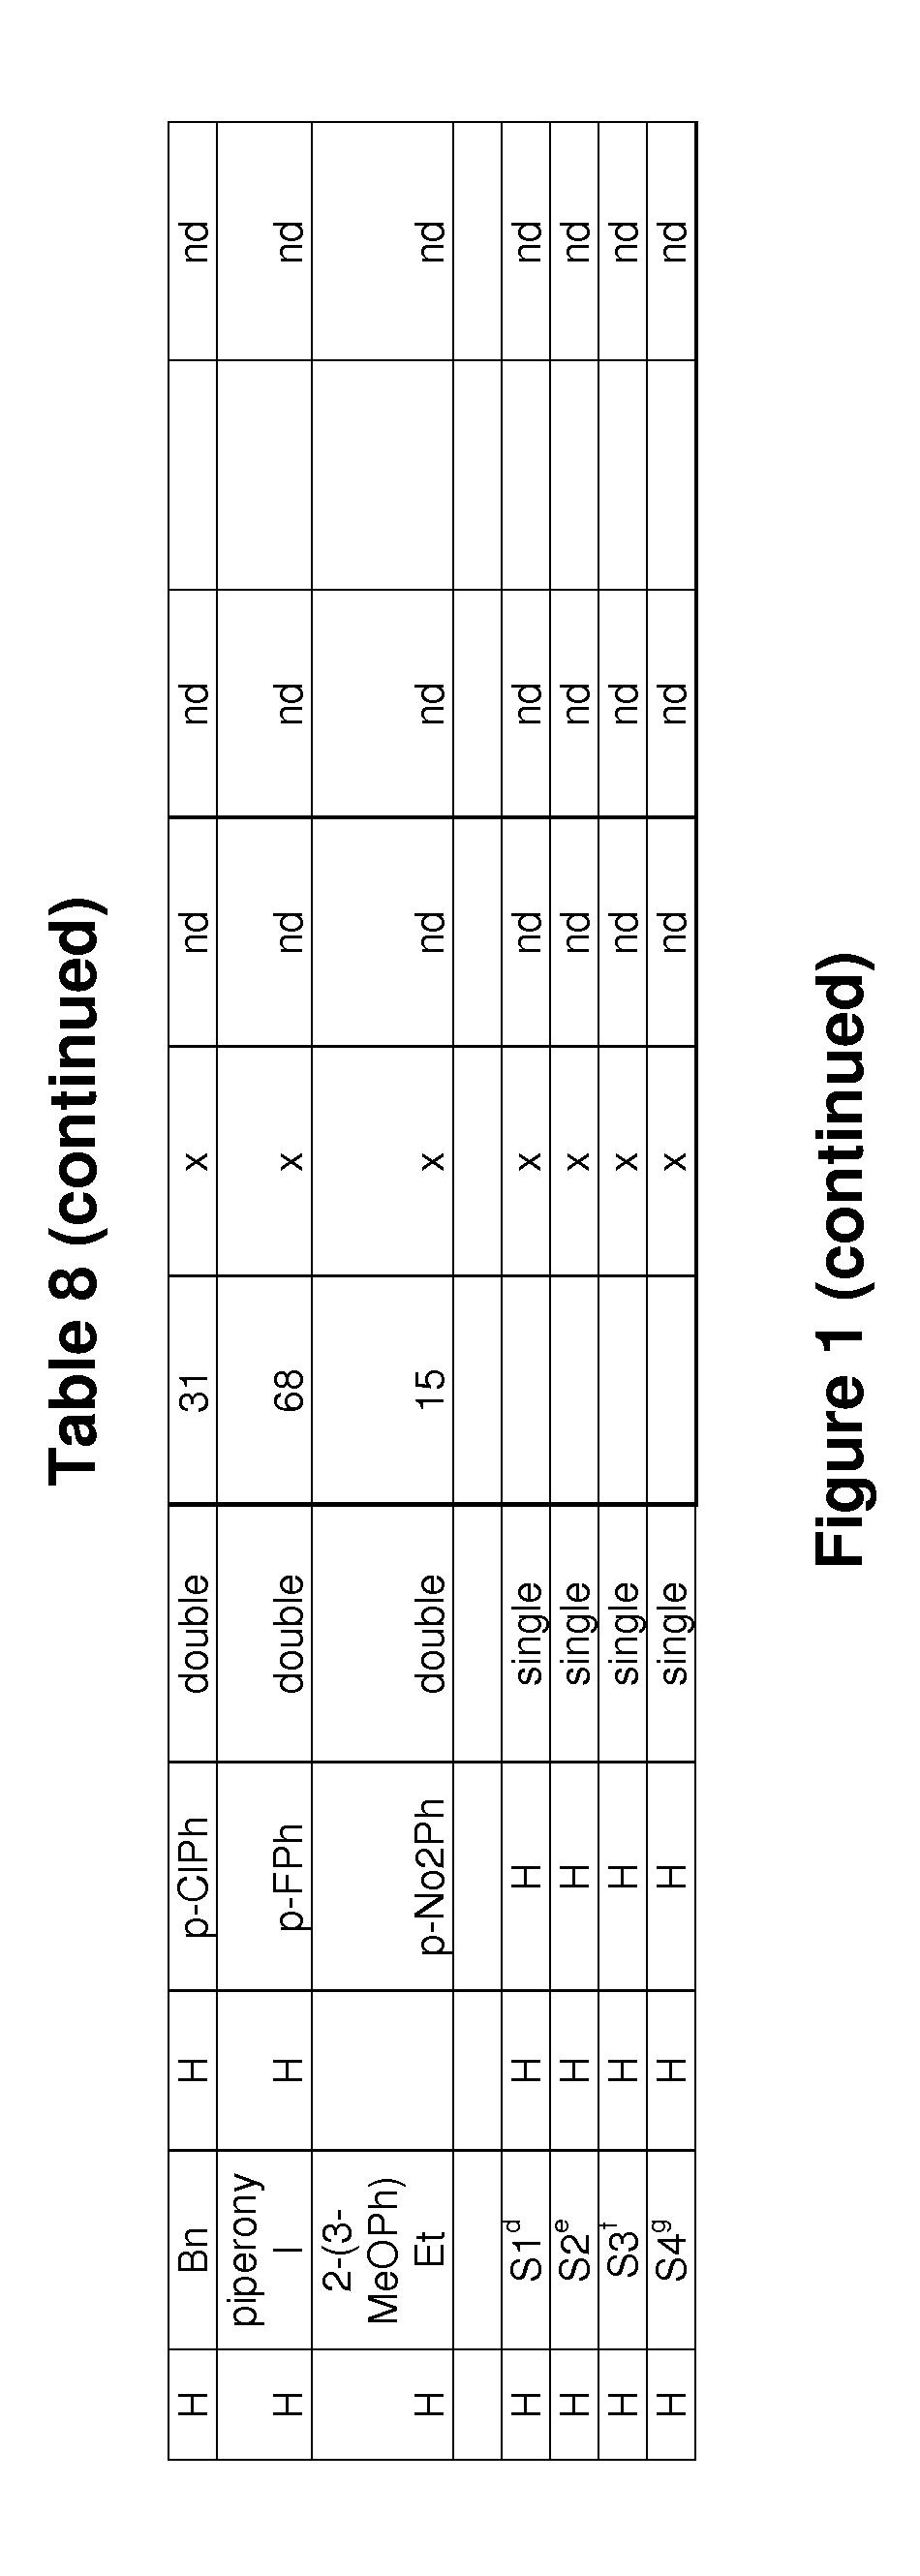 Compounds, compositions, and methods for controlling biofilms